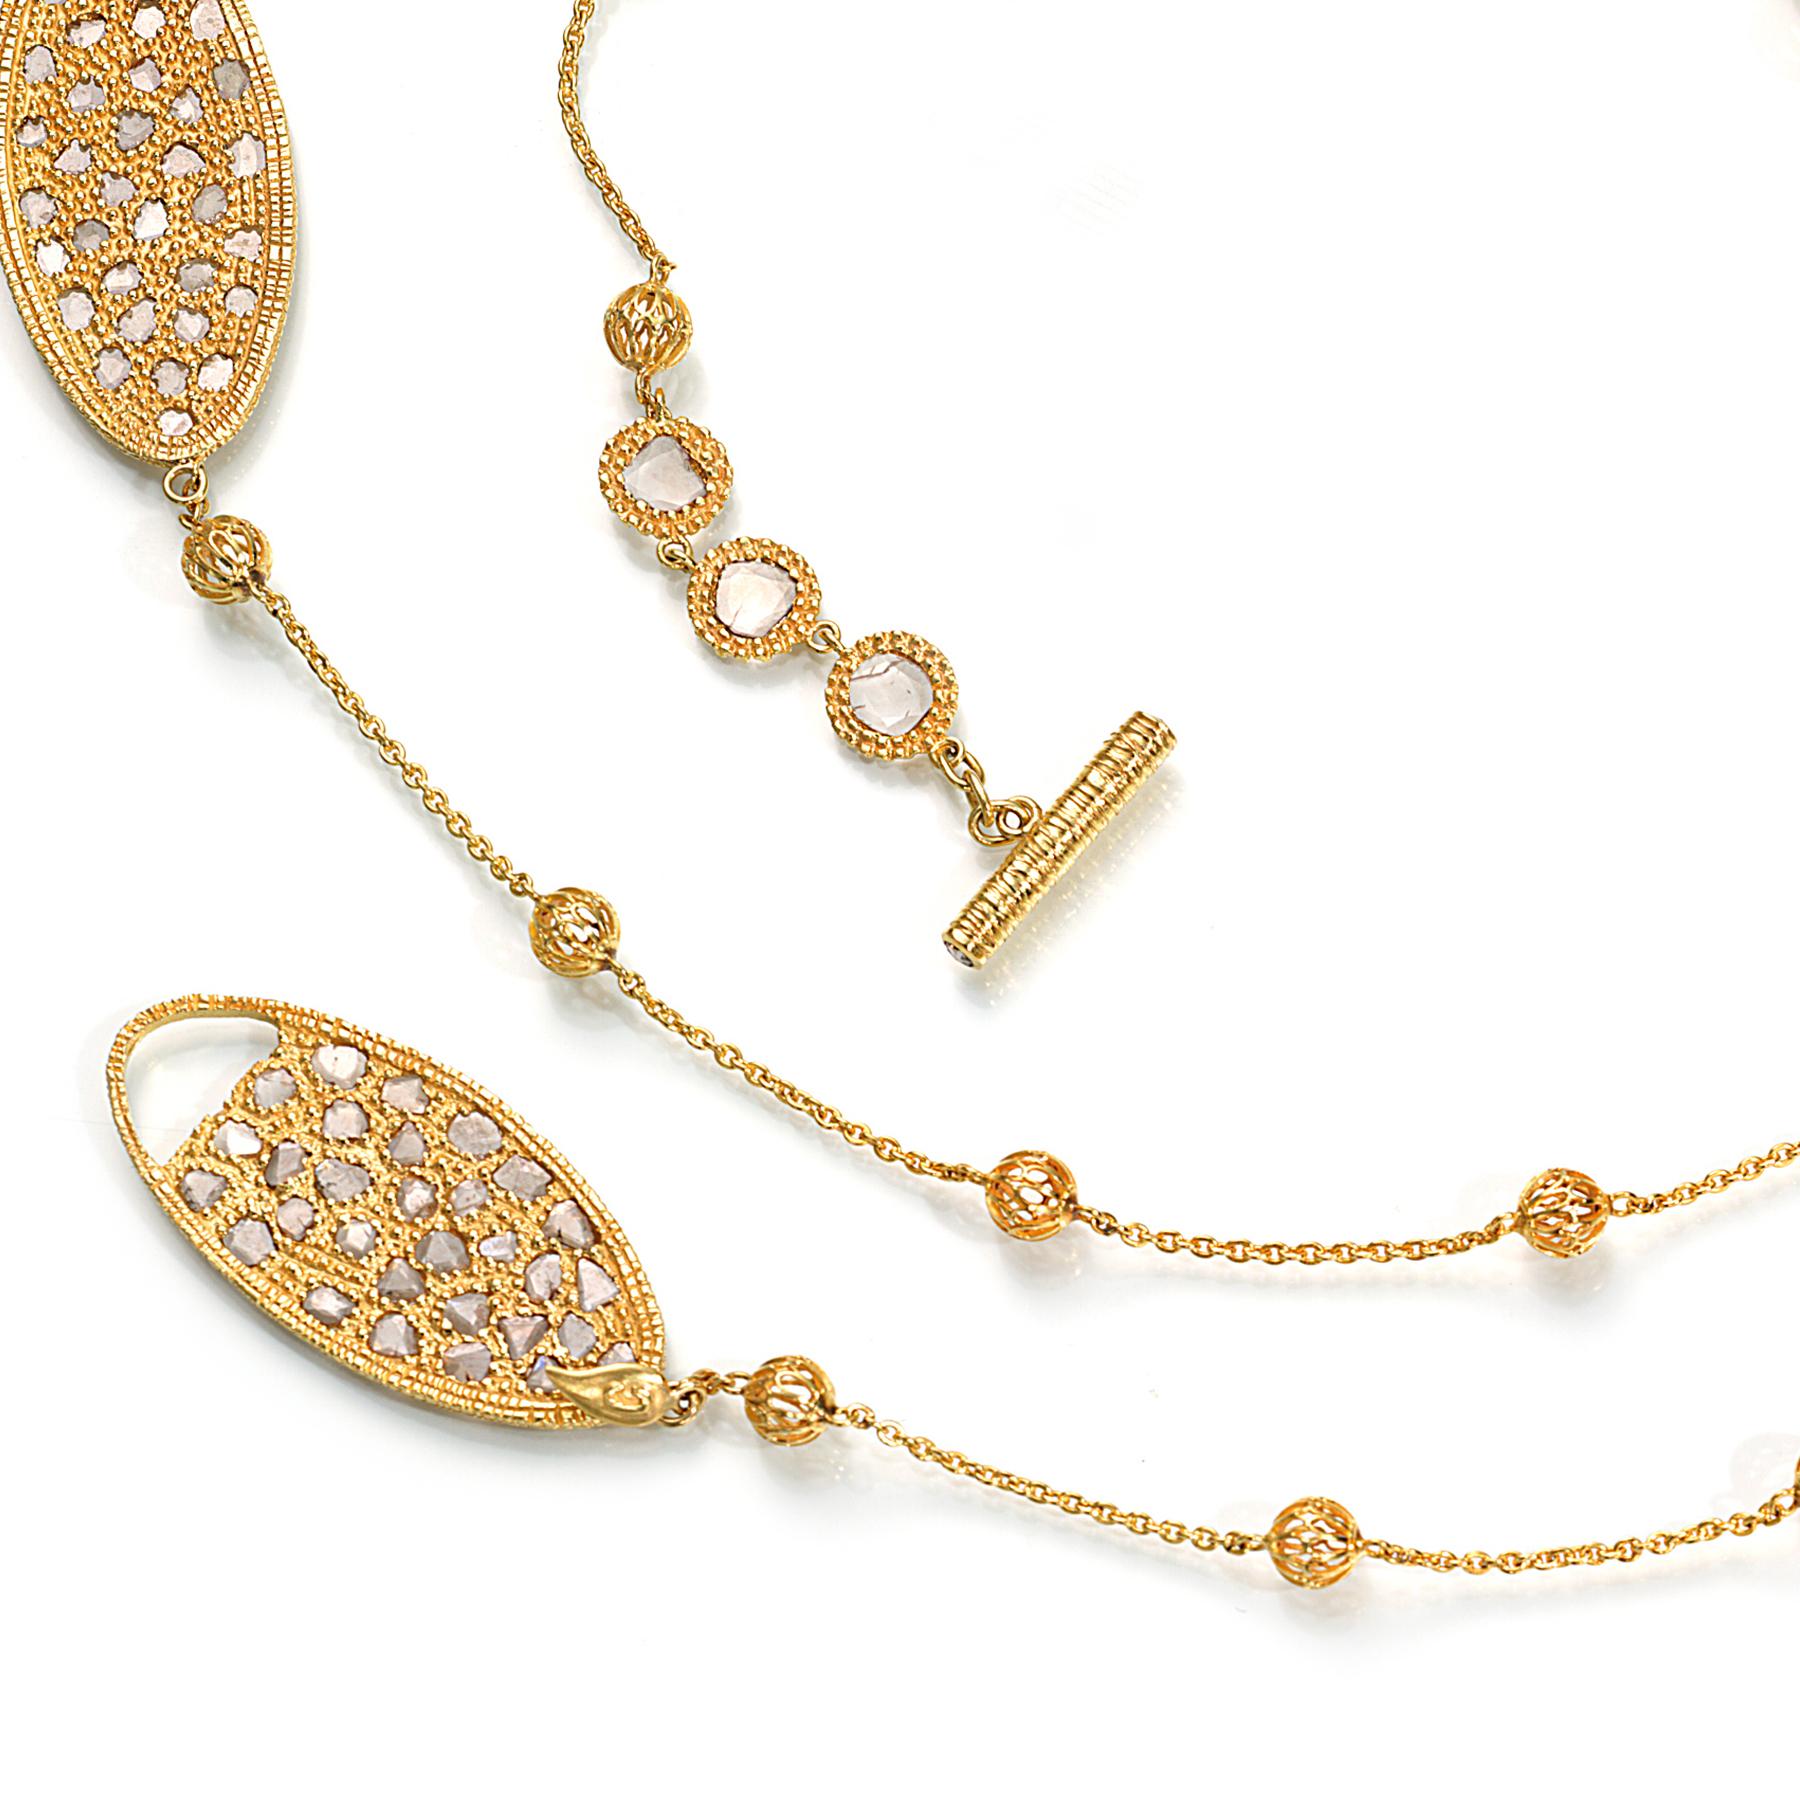 Beautiful Three Oval Necklace Set in 20 karat Yellow Gold with 4.50-carat Rose-cut Diamonds. This necklace comes with a toggle clasp and is part of COOMI's Eternity Collection. The Eternity Collection is inspired by the flow of movement in different